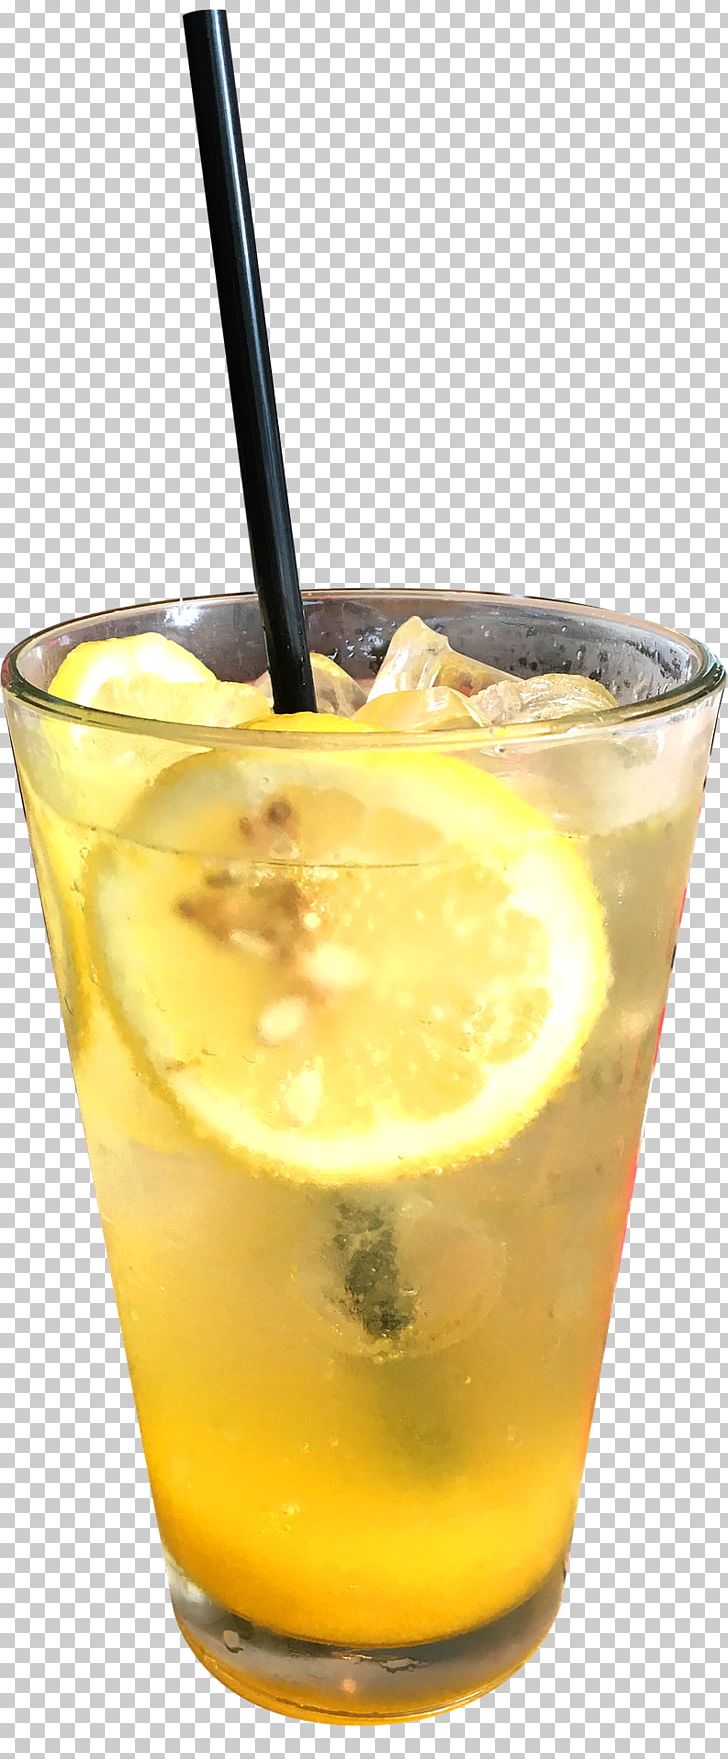 Whiskey Sour Fuzzy Navel Caipirinha Long Island Iced Tea Harvey Wallbanger PNG, Clipart, Alcoholic Drink, Caipirinha, Caipiroska, Cocktail, Cocktail Garnish Free PNG Download